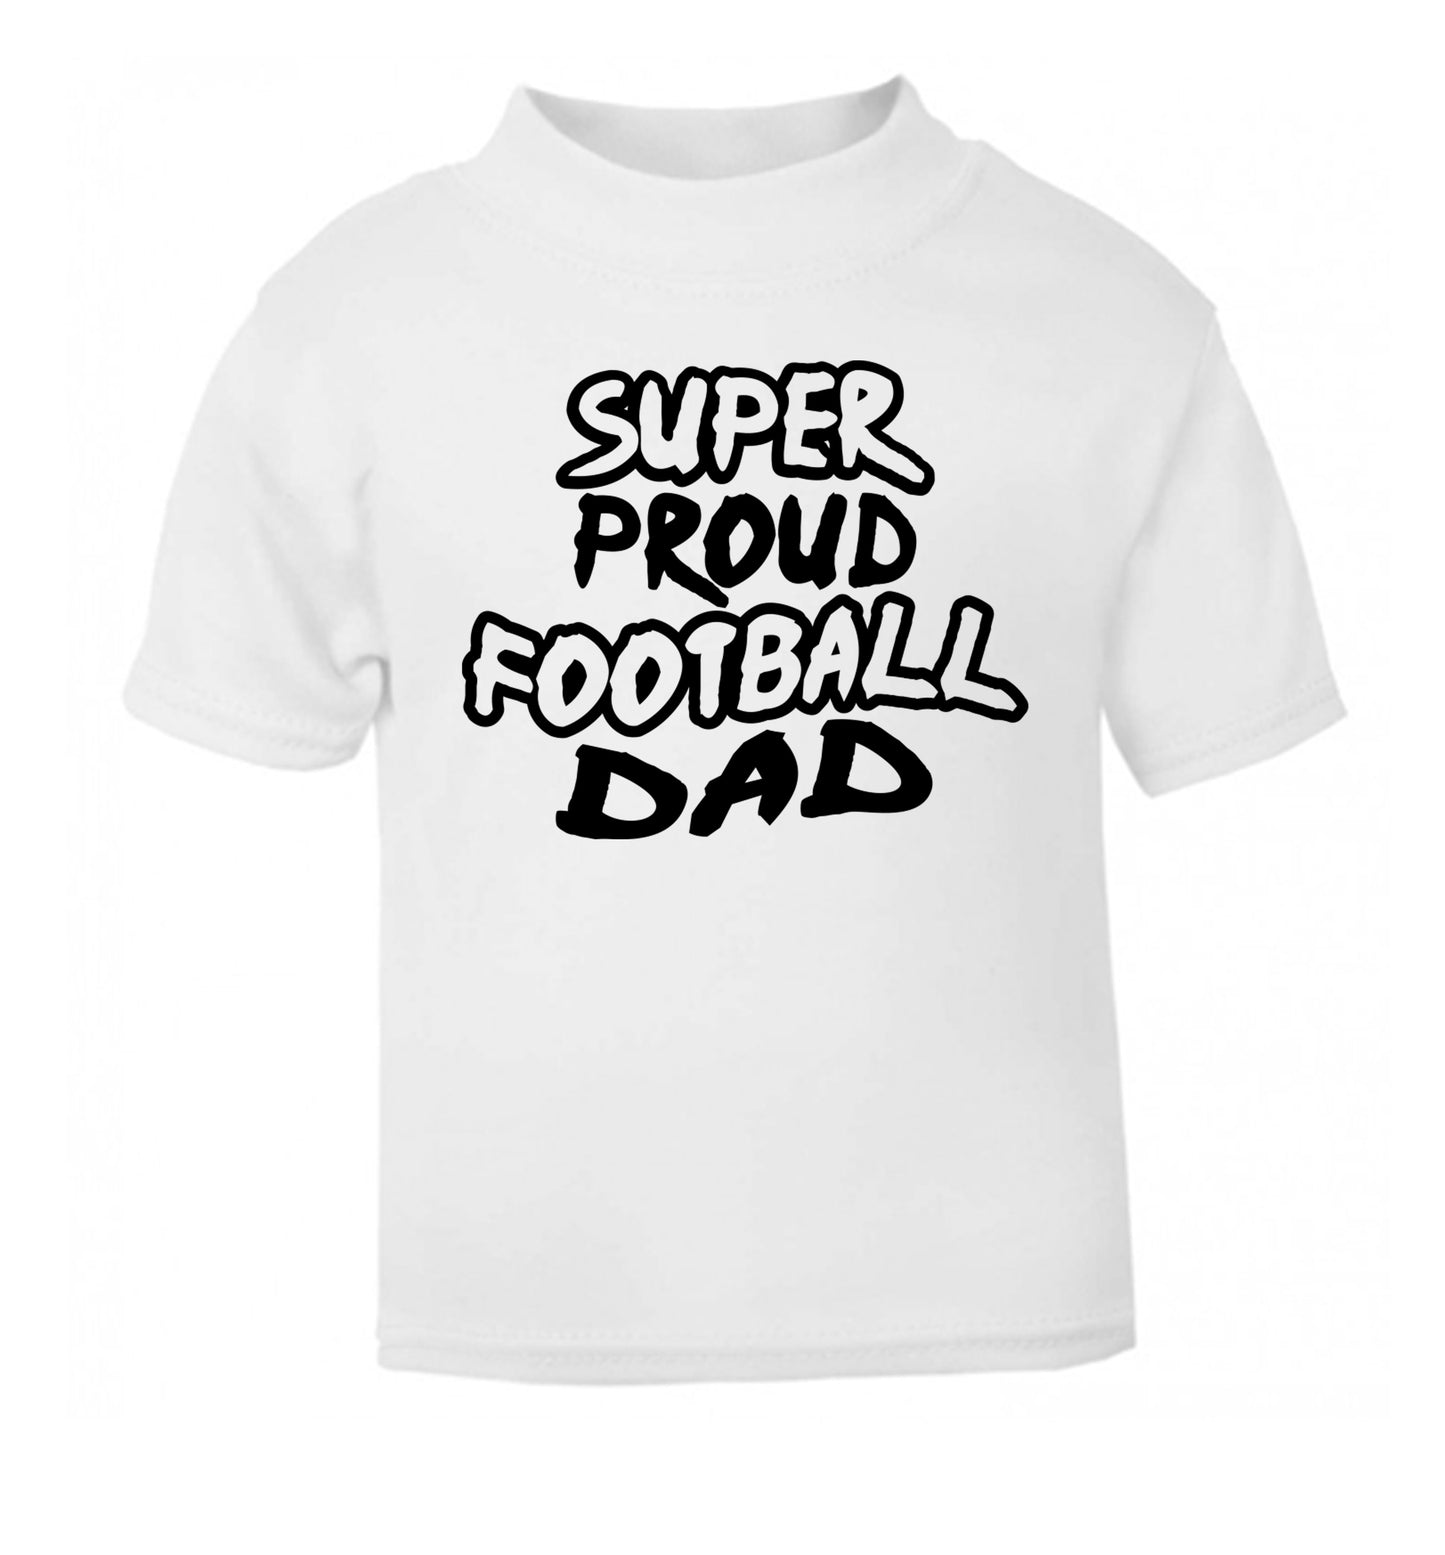 Super proud football dad white Baby Toddler Tshirt 2 Years